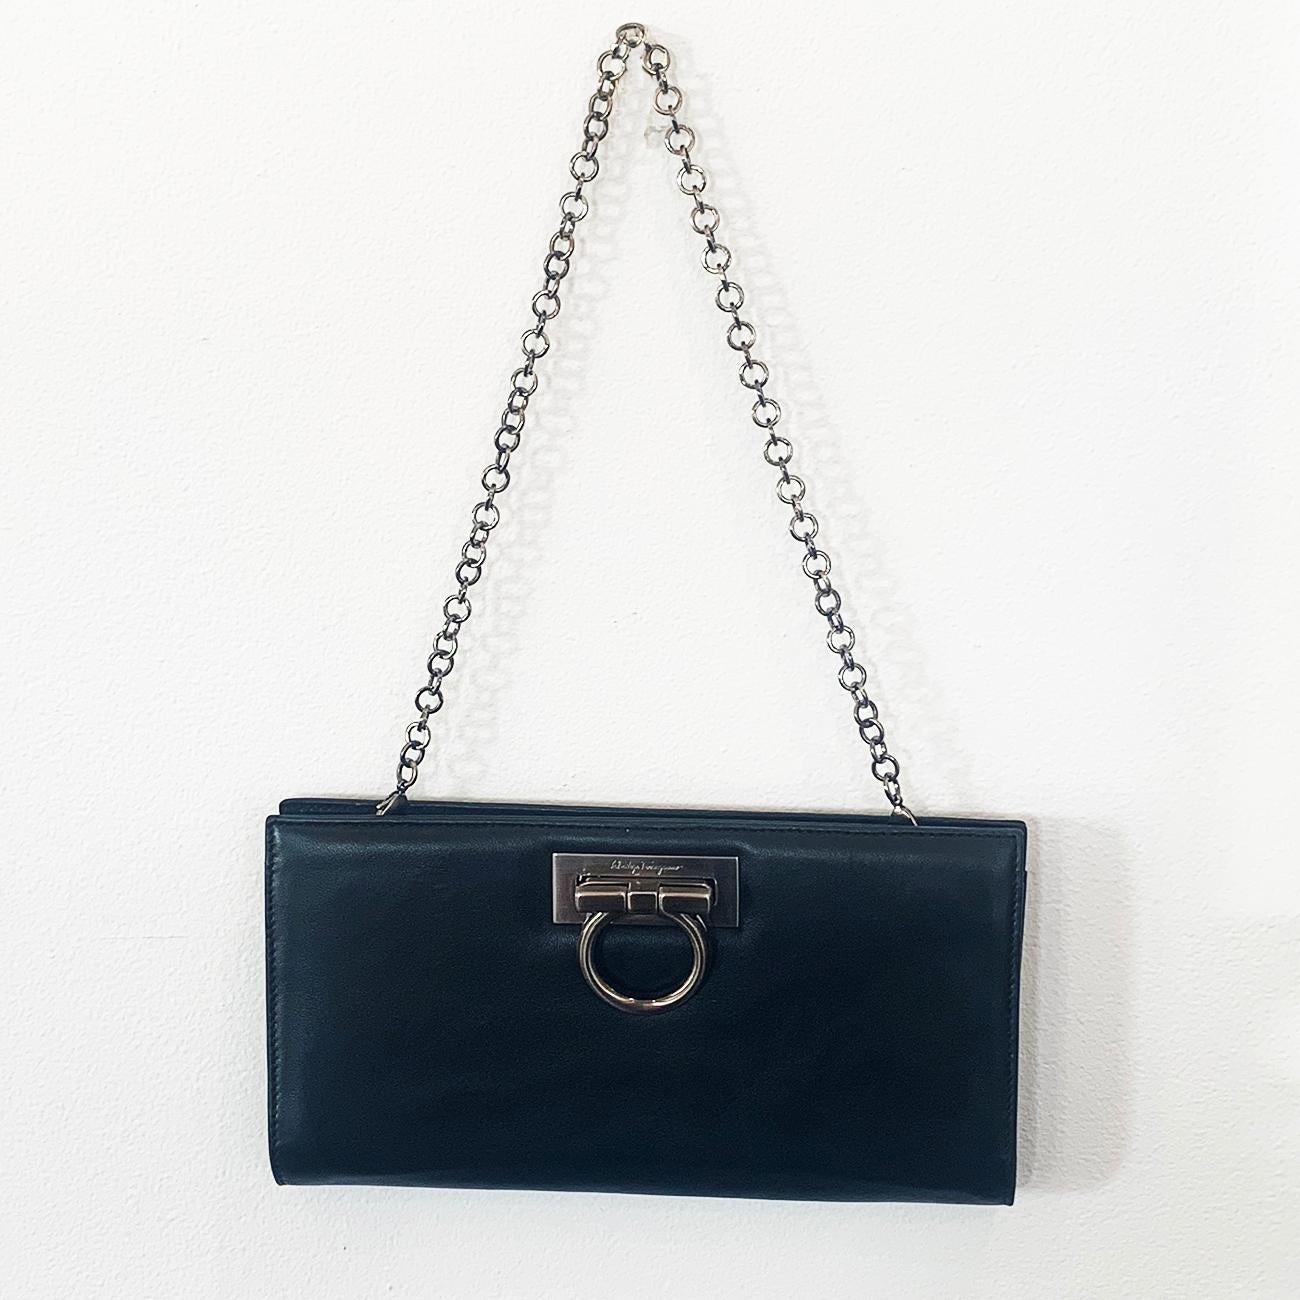 Authentic Salvatore Ferragamo Handbag or Clutch Purse  with removable, black chrome chain Handle, with Lobster Claw Clasp at end of chain handle (all made in Italy). New Old Stock with original  “signed” Dust bag included. All in excellent